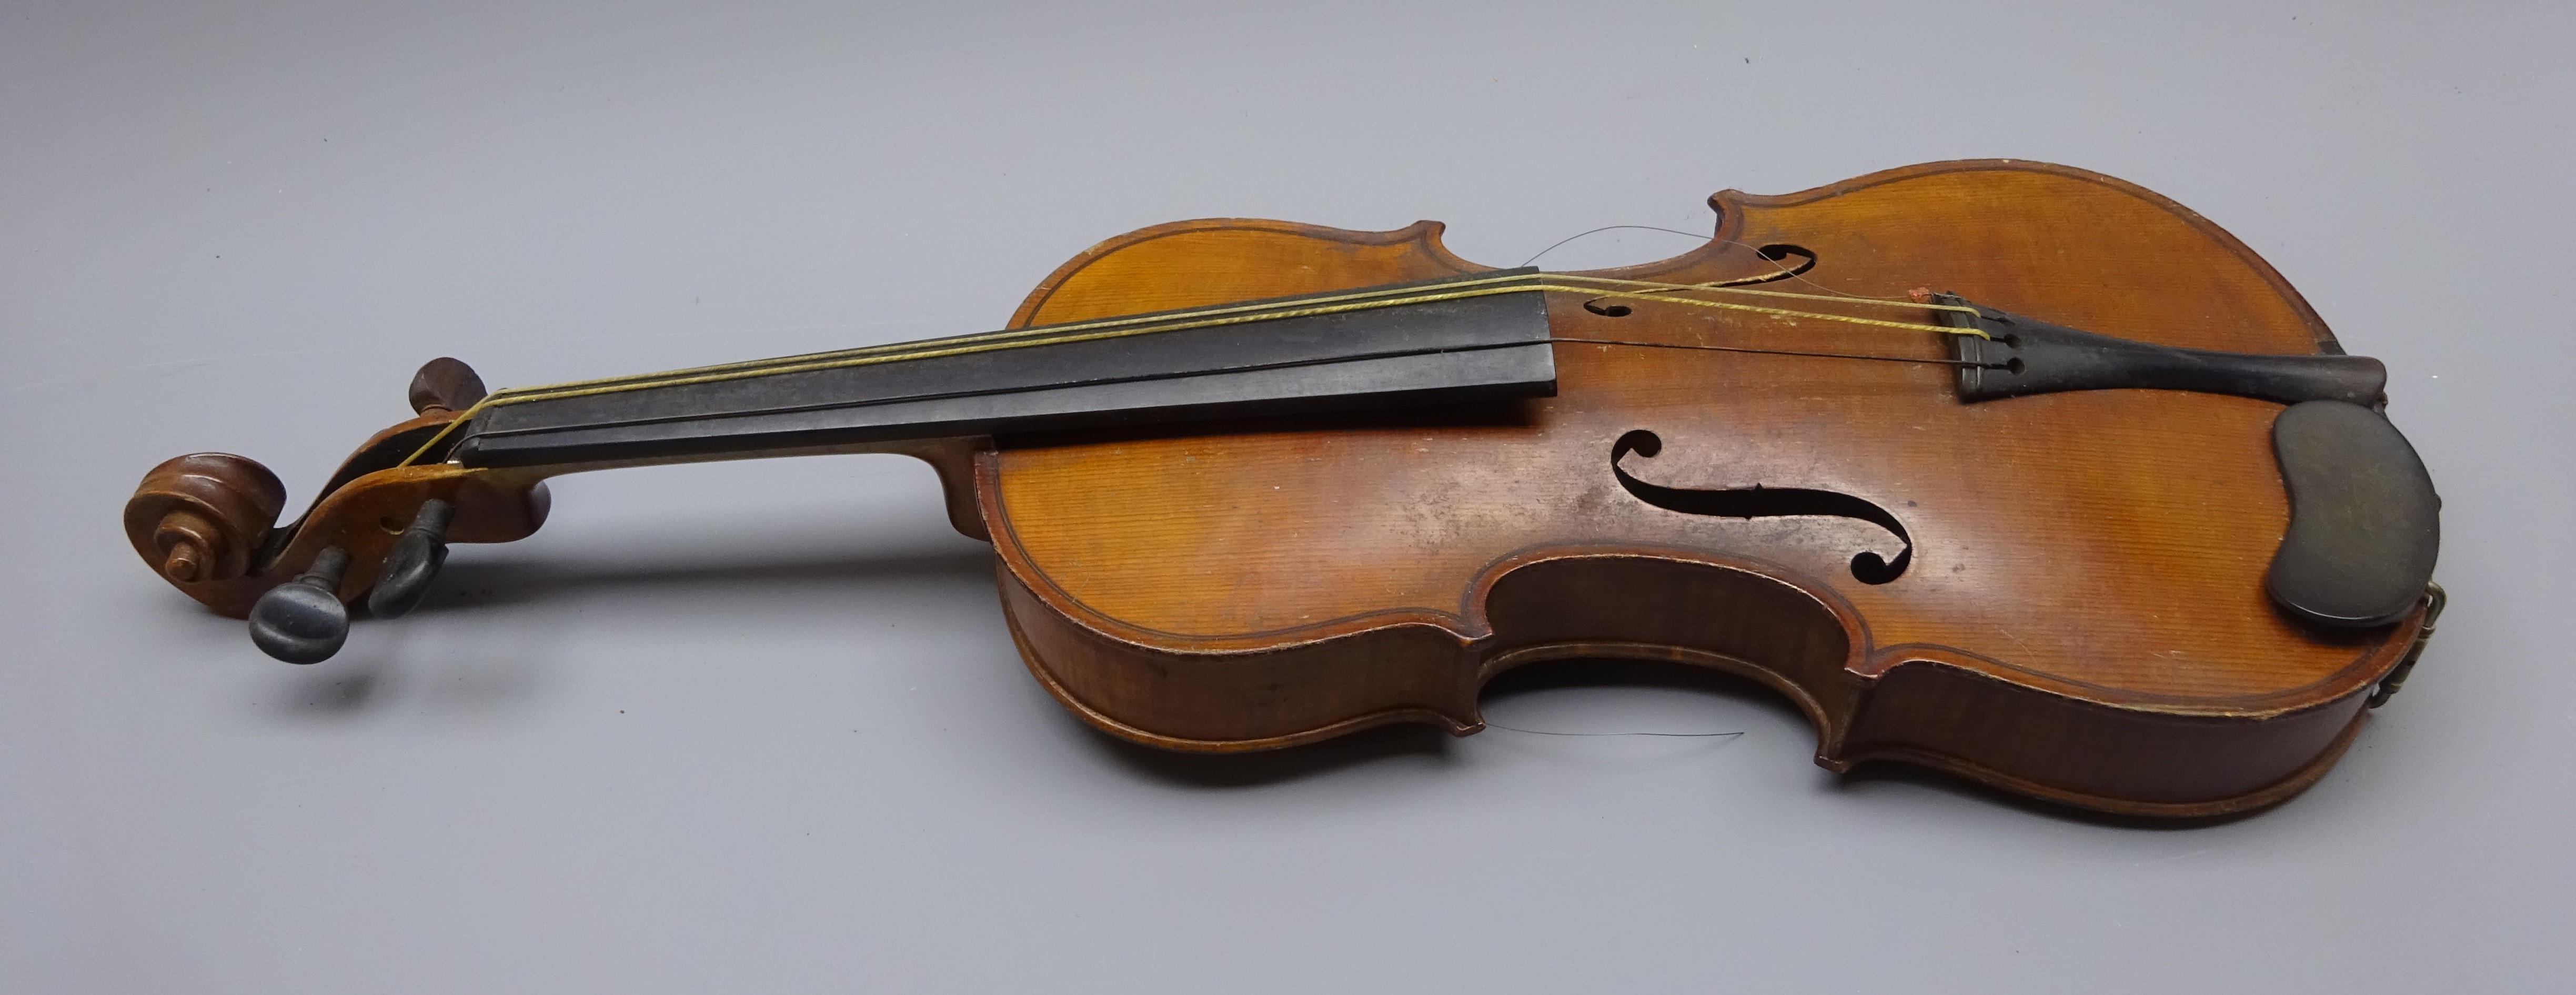 Early 20th century Saxony three-quarter size violin c1900 with 33. - Image 4 of 13